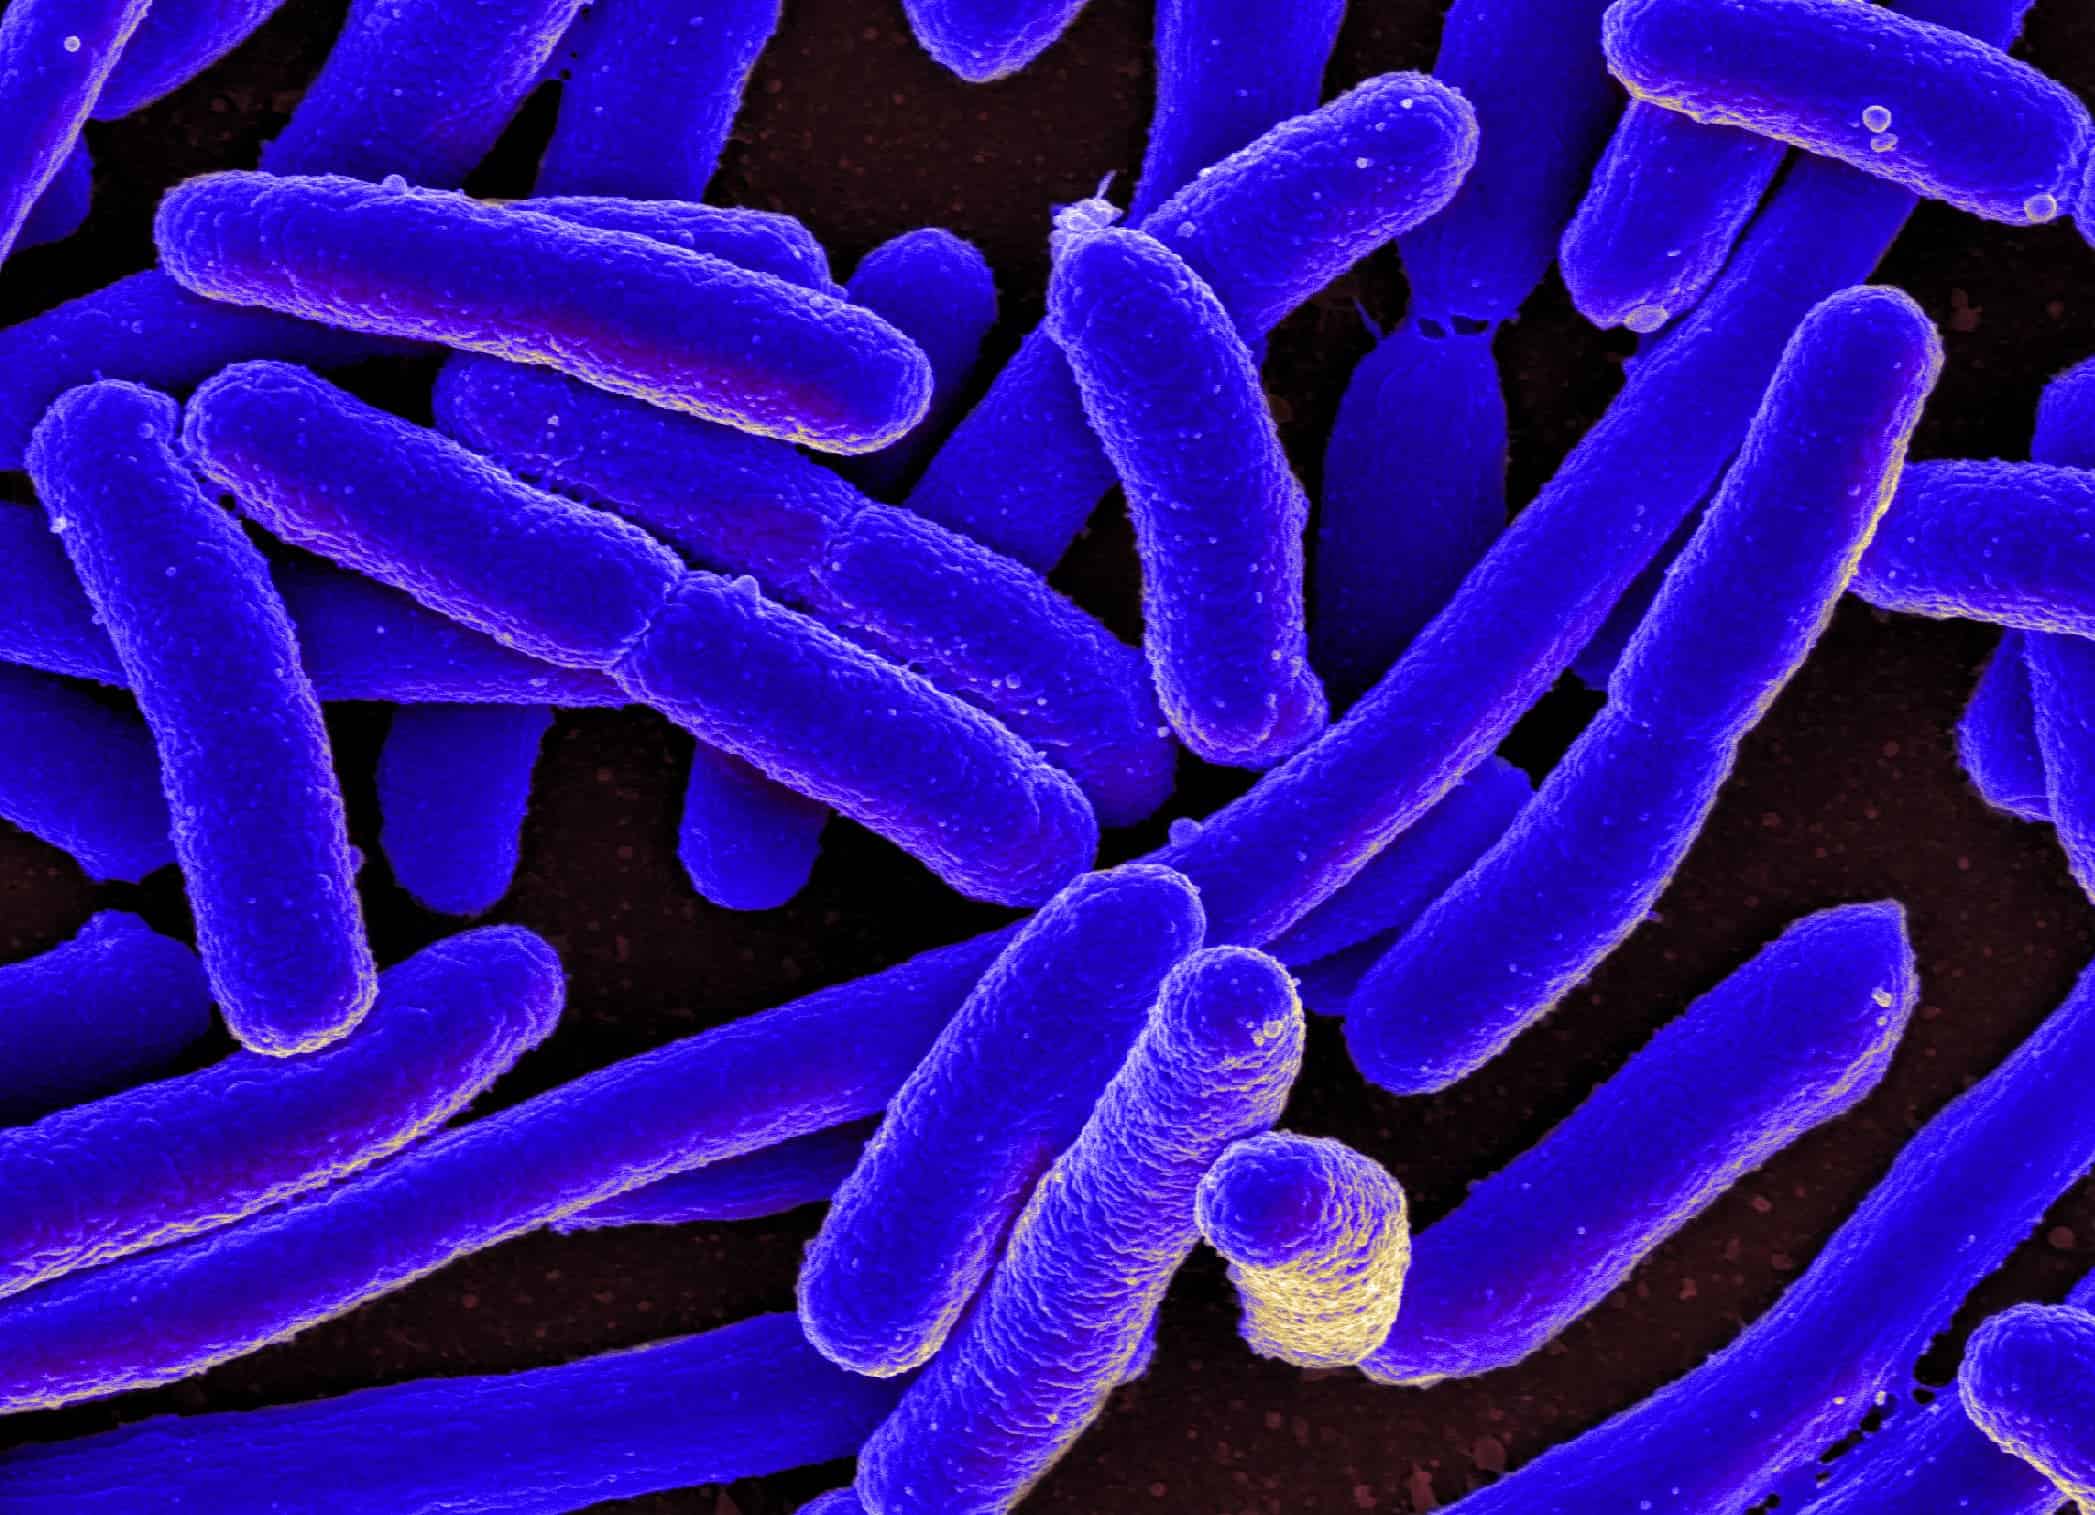 Bacteria can be used to make power. Image credits: NIAID.